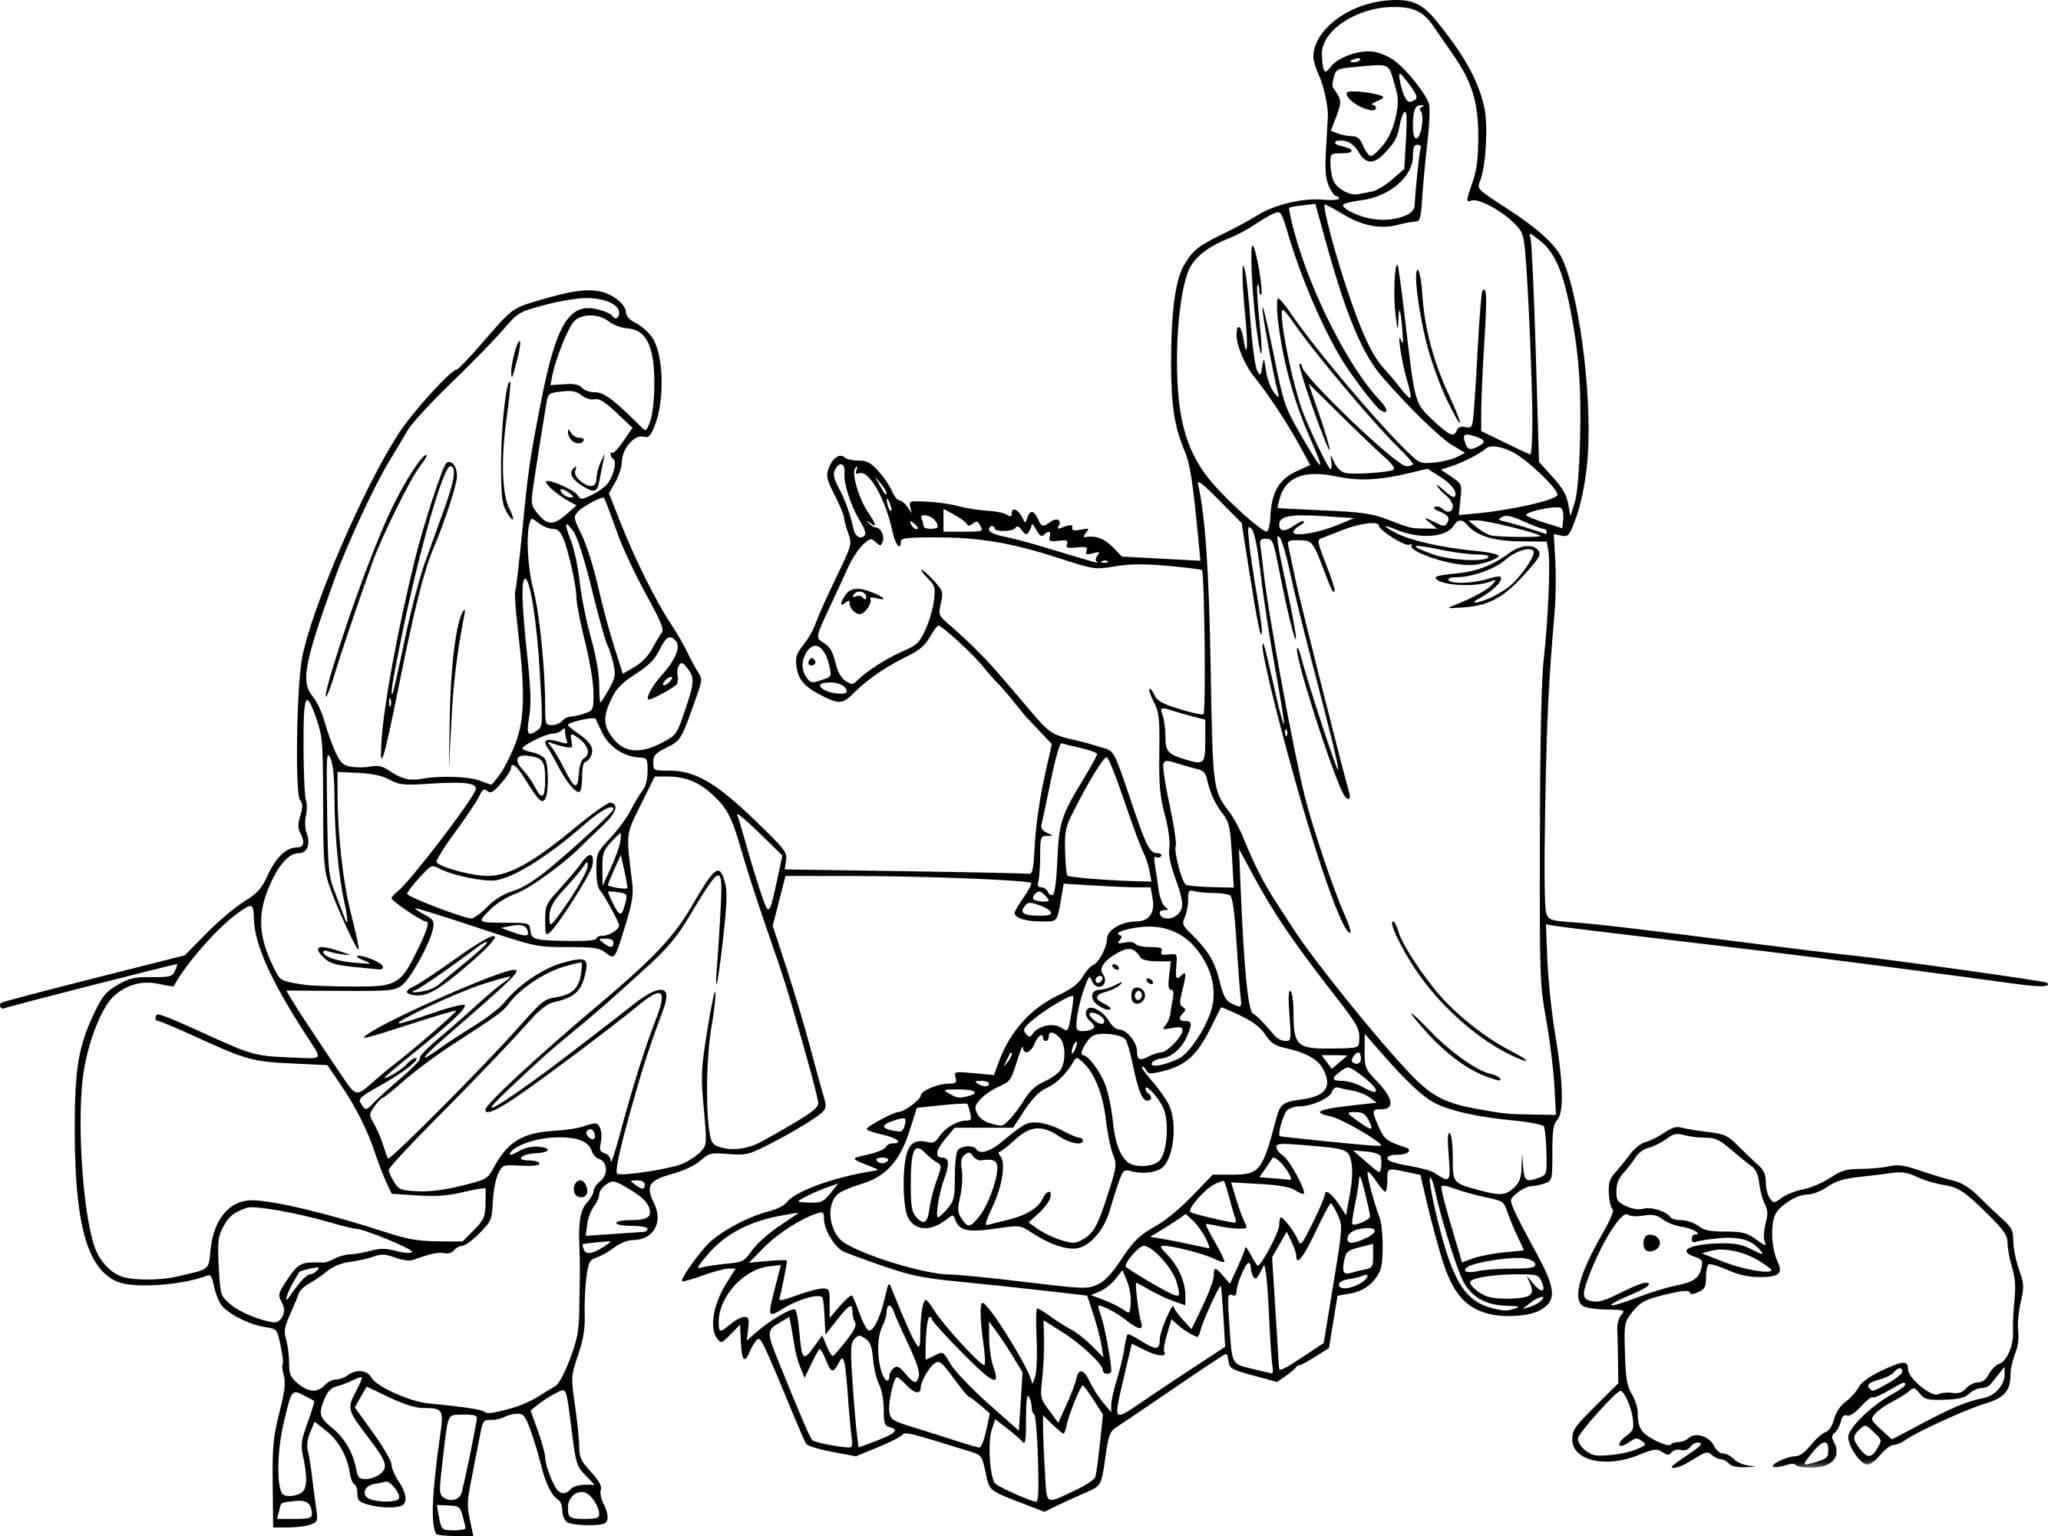 The Most Holy Theotokos And Joseph Coloring Pages - Coloring Cool